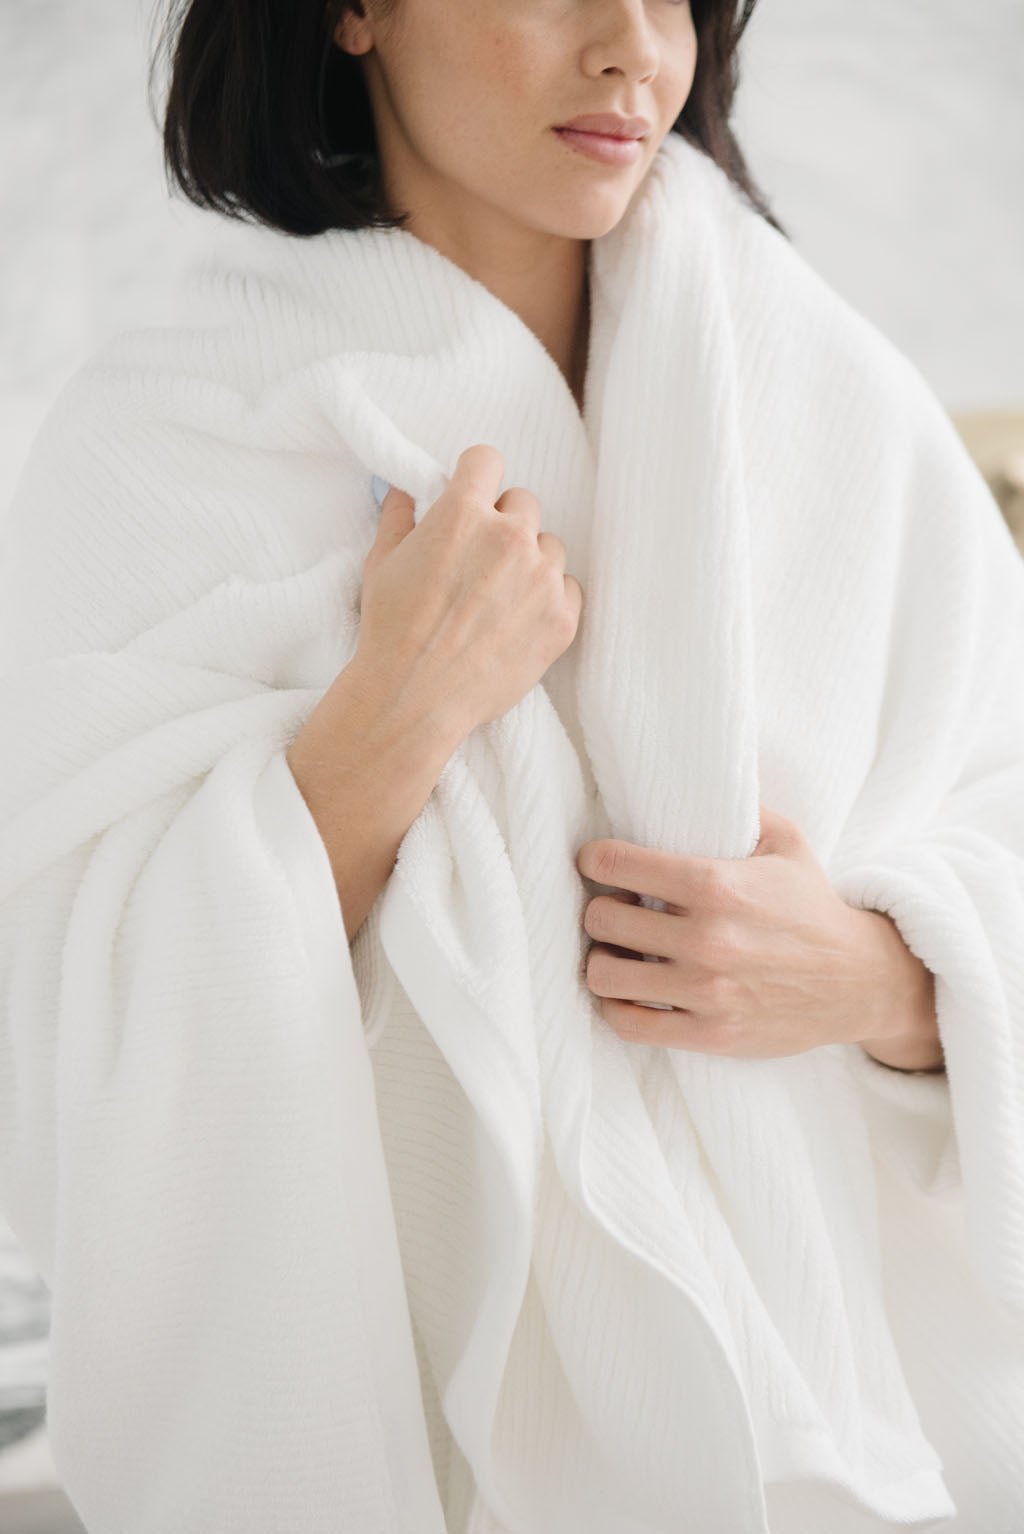 Ribbed Terry Bath Sheets in the color White. Photo of product taken in a bathroom as a woman wears the towel. 